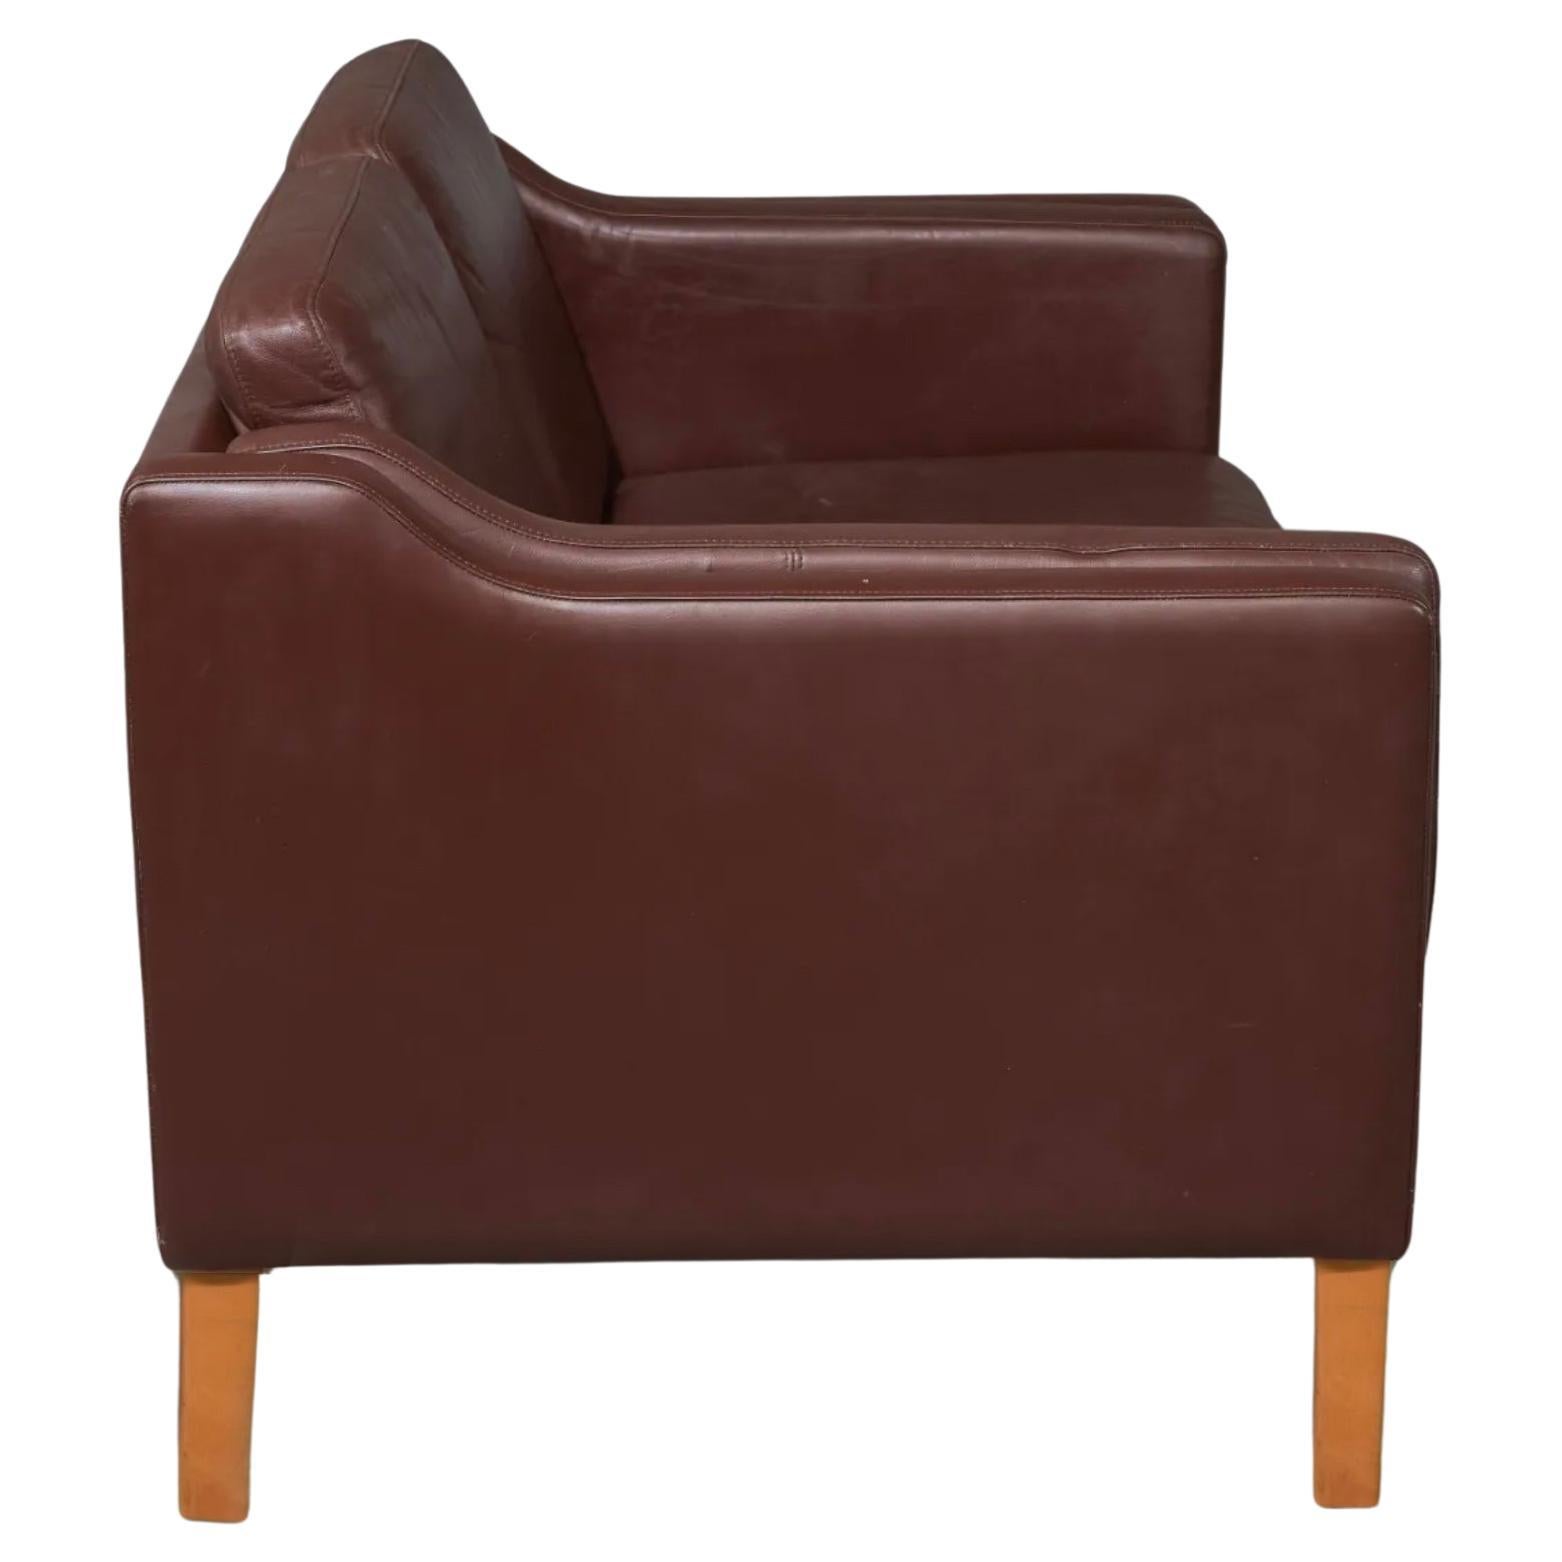 Scandinavian Danish Modern Brown Leather Two Seater Sofa or Loveseat in the style of Borge Mogensen. Soft Dark brown leather sofa on solid Birch legs. Great design. Made In Denmark Located in Brooklyn NYC.

Measures 52” w x 31” d x 30” high
Seat